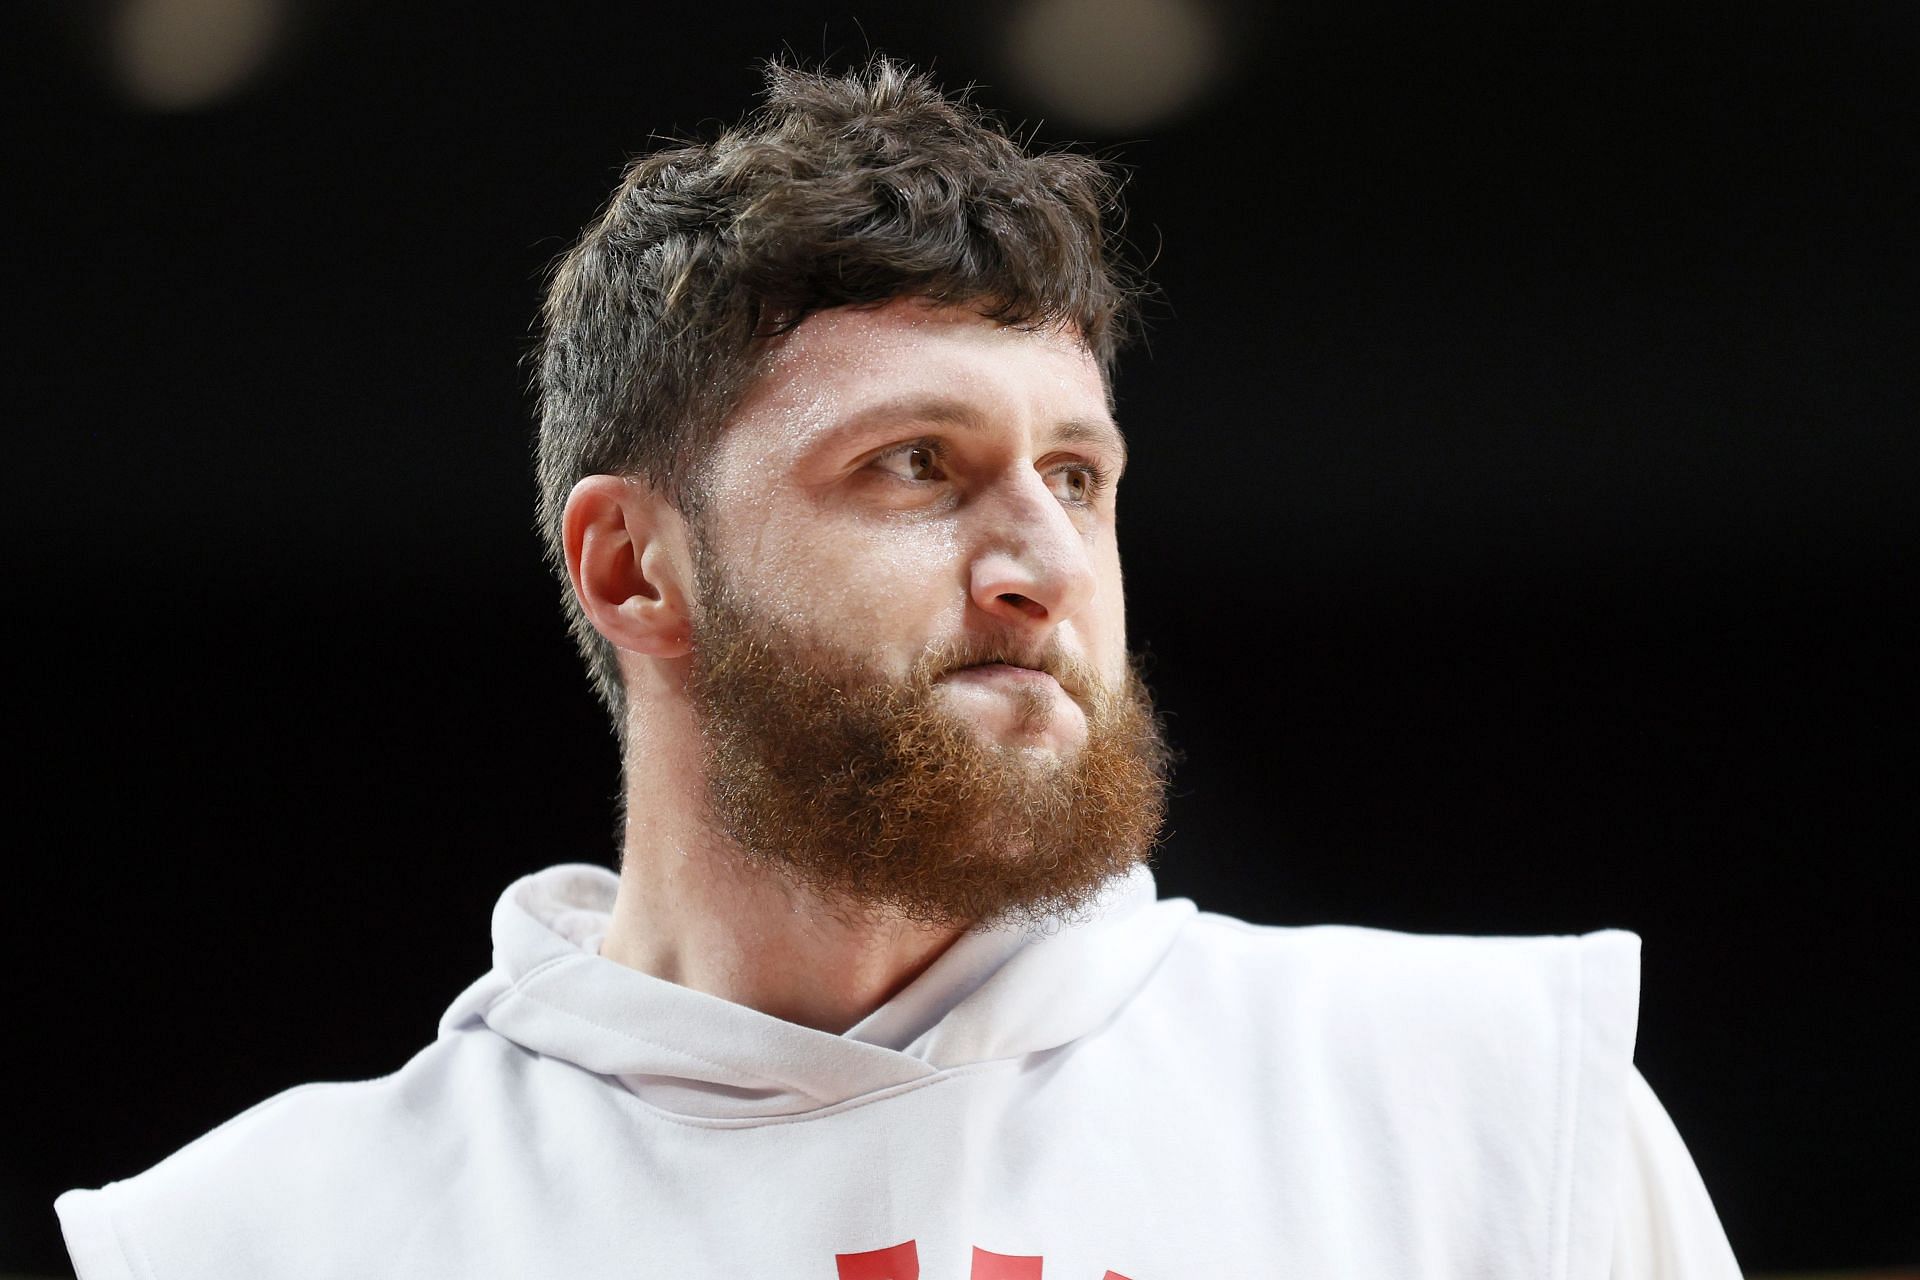 Jusuf Nurkic was ejected from the Portland Trail Blazers-Miami Heat game for throwing a punch at Tyler Herro